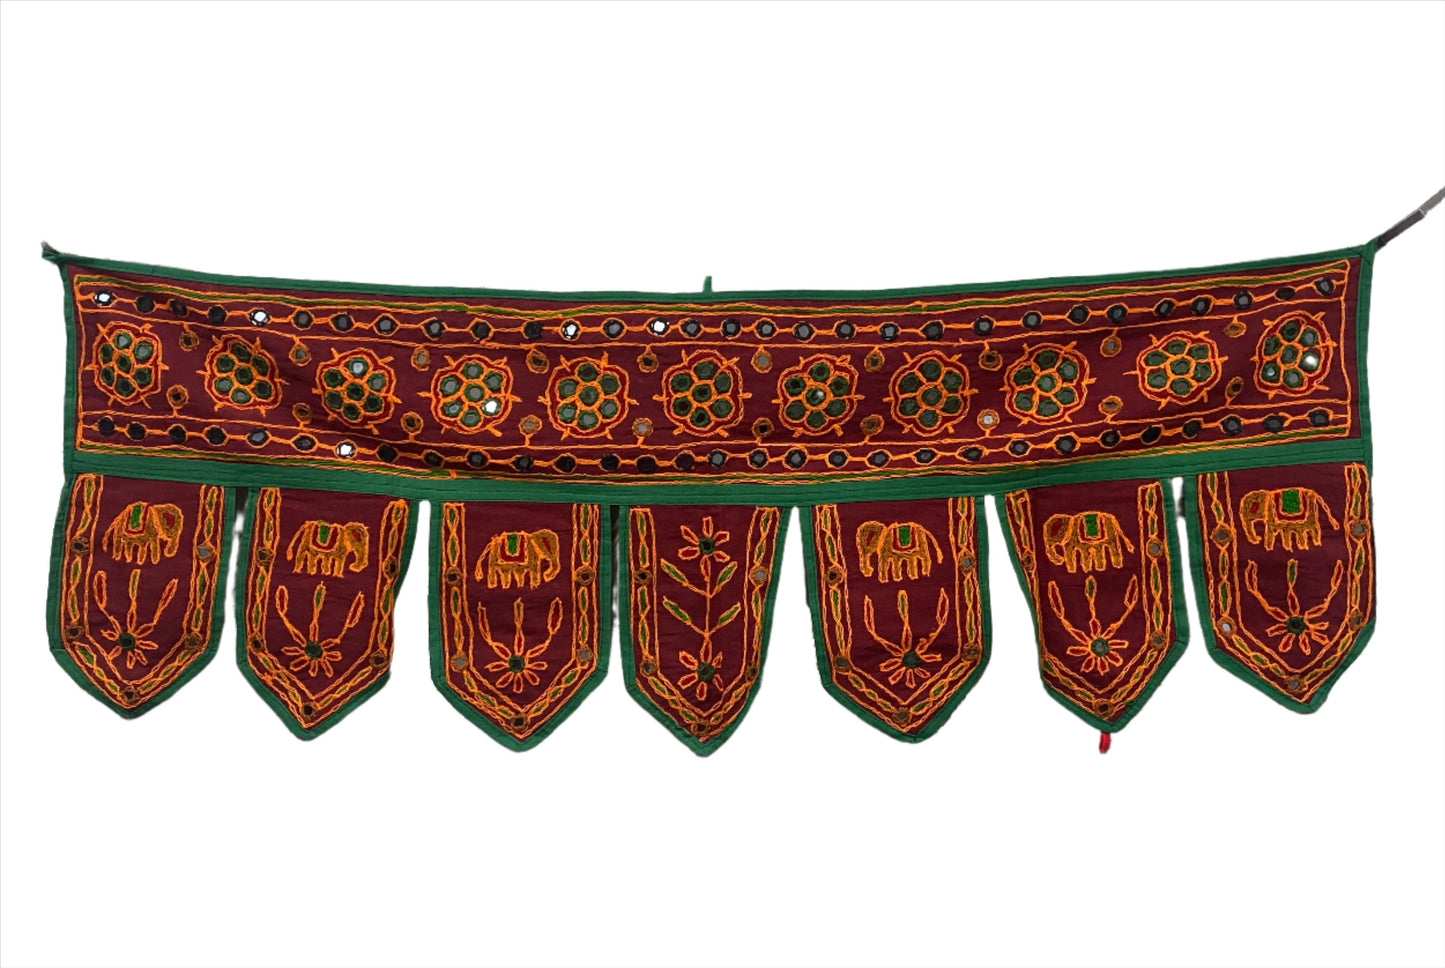 Rajasthani Embroidered Toran with Elephants and Mirrors - Available in 6 Colors